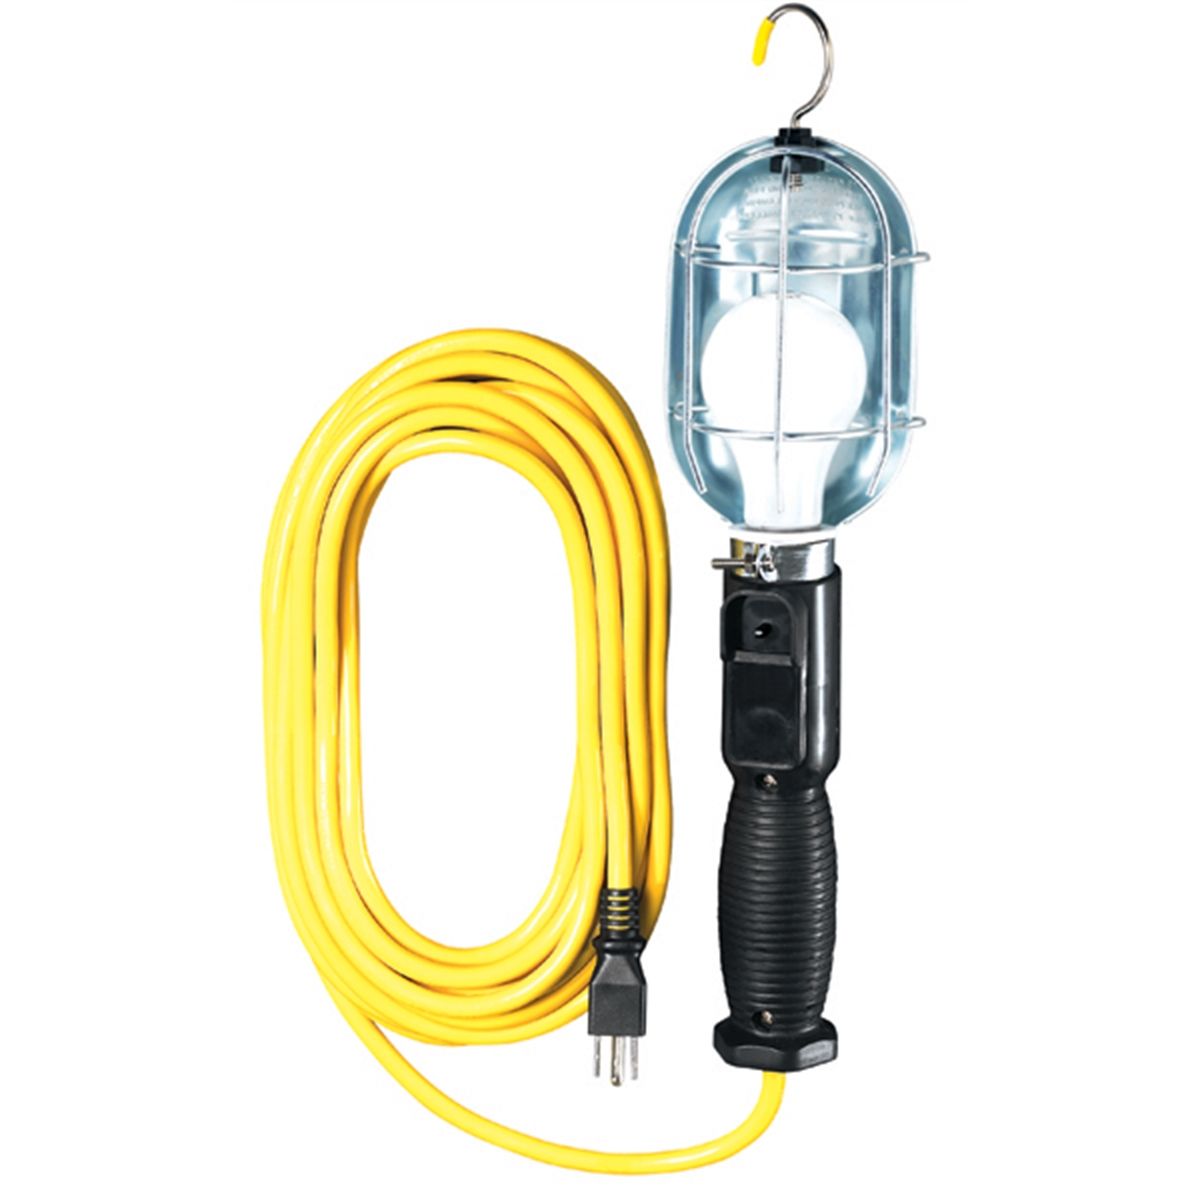 25-ft HEAVY DUTY INCANDESCENT TROUBLE WORK LIGHT w/ Hook and Extra Socket 